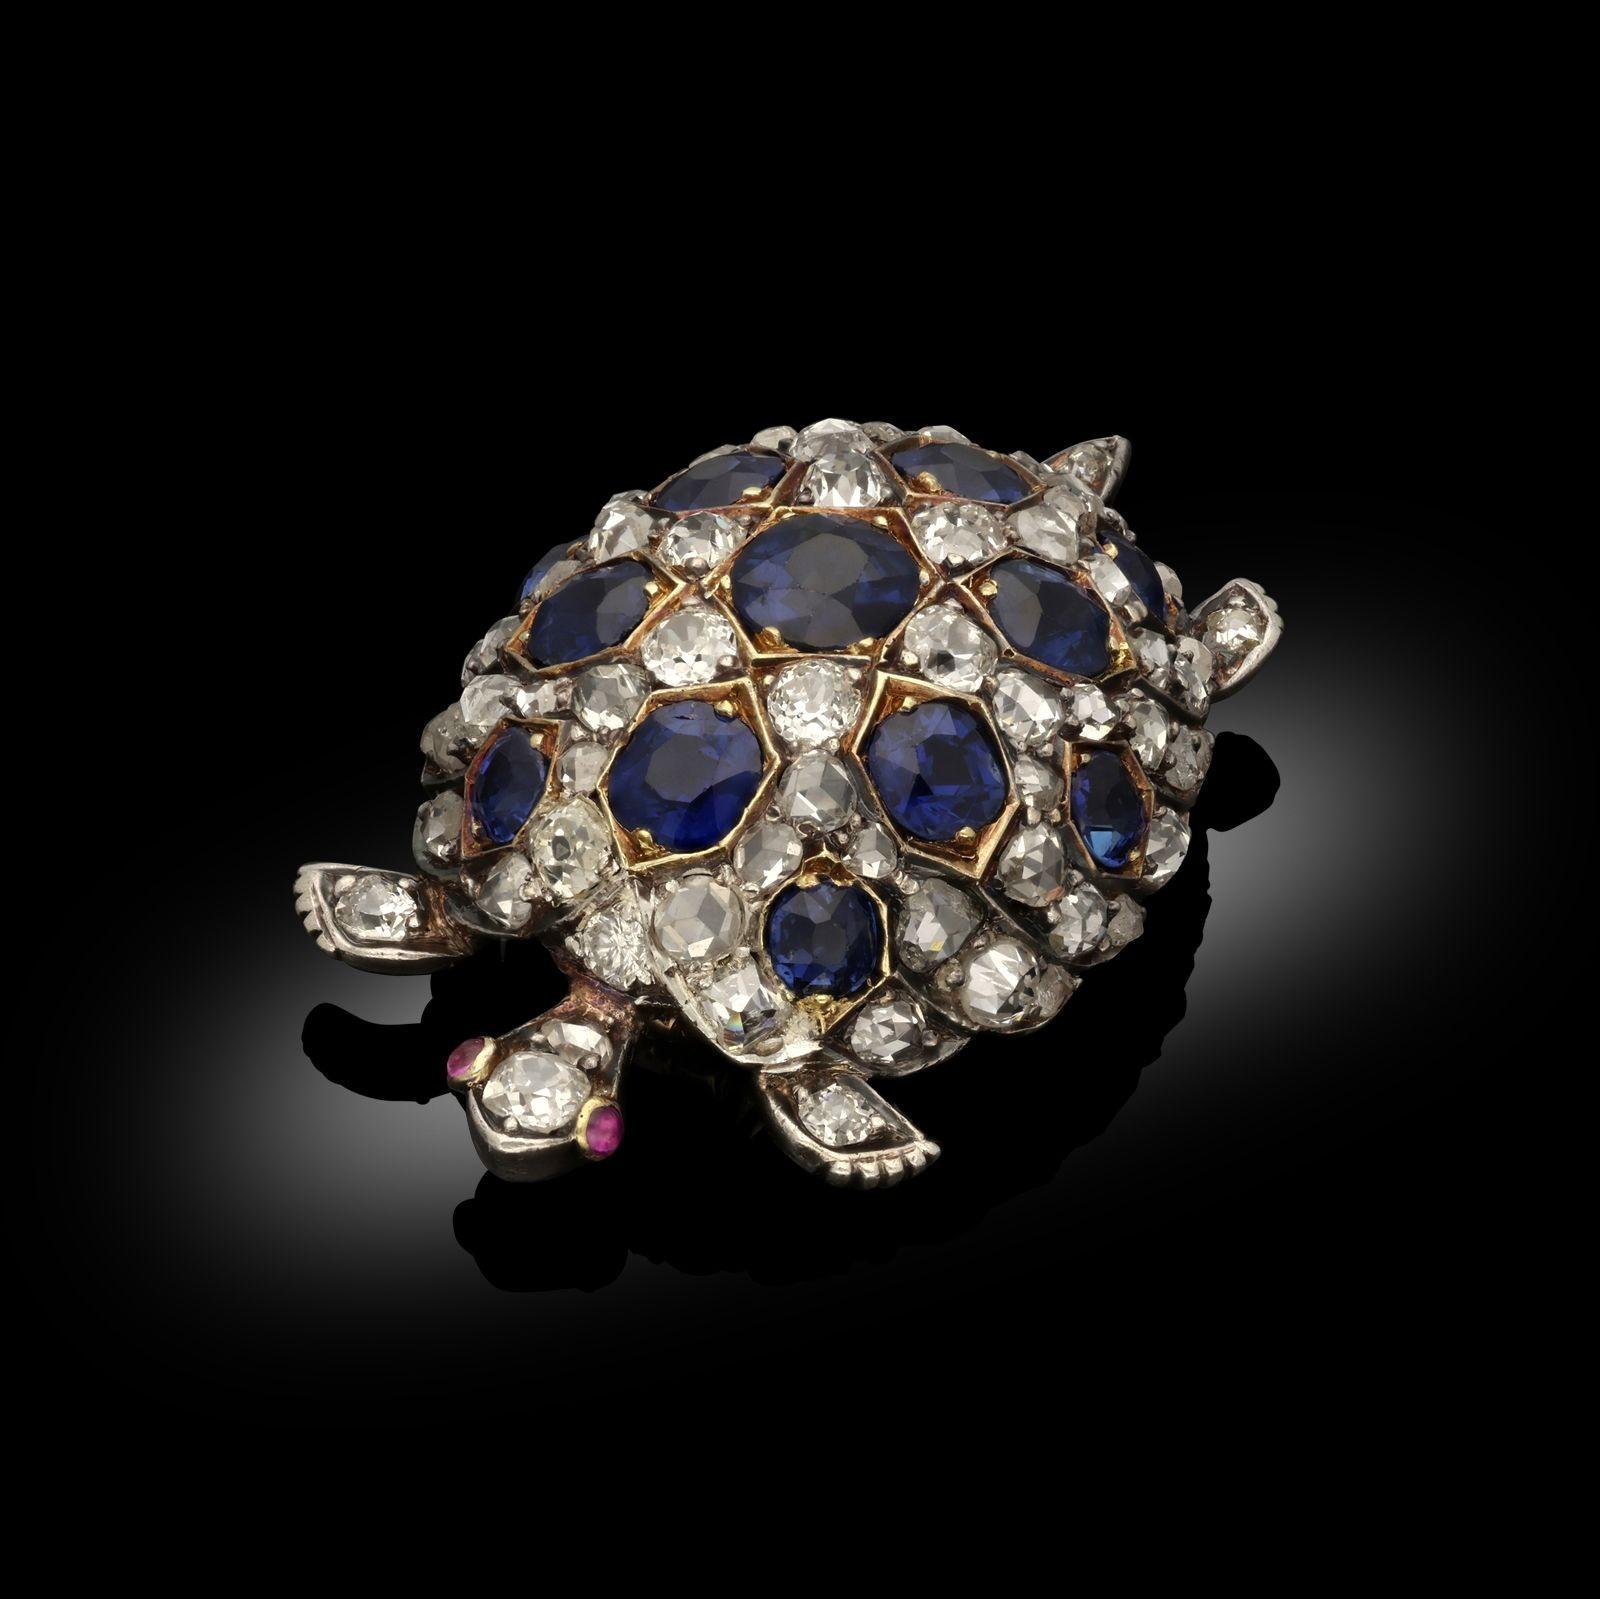 An antique tortoise brooch, circa 1870. The tortoise is of a realistic design with a high domed shell, set with old cut diamonds and cushion cut sapphires. The sapphires are set in yellow gold depicting a characteristic tortoise shell pattern. The